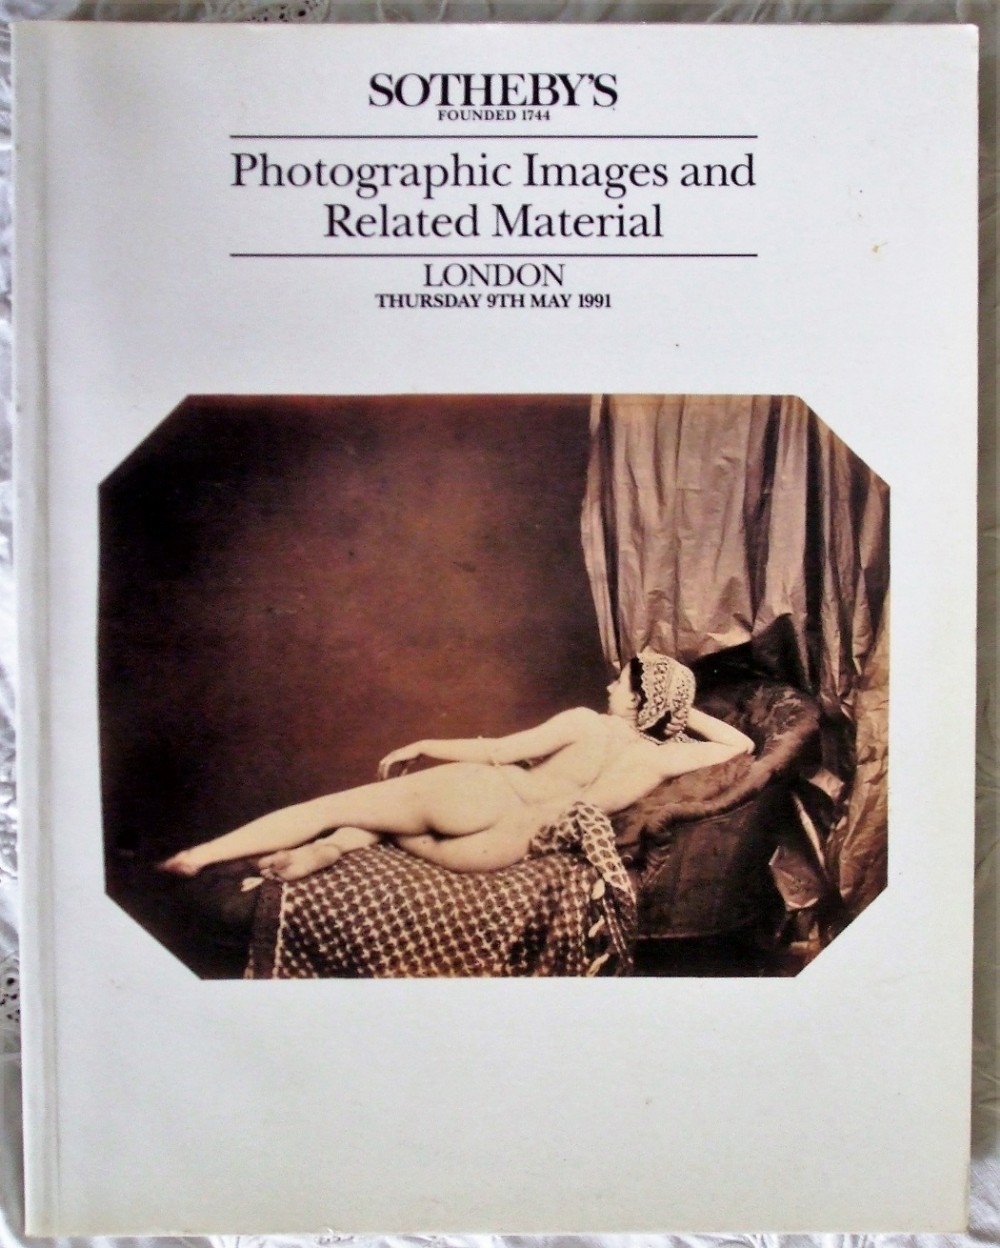 sotheby's photographic images and related material london 09 05 1991